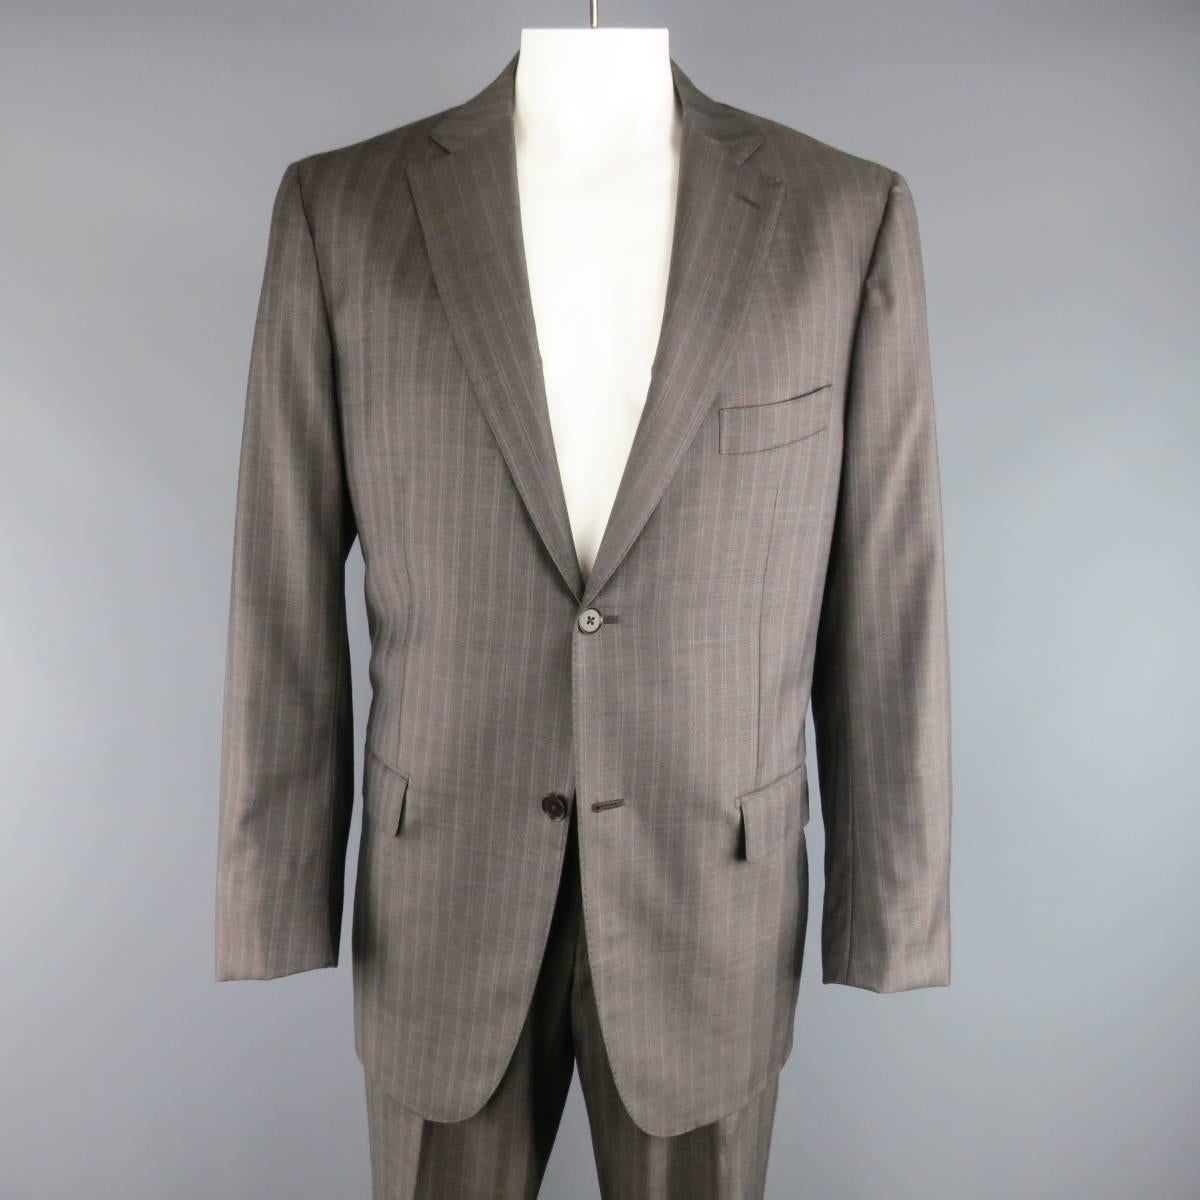 ISAIA two piece suit comes in a taupe gray wool with all over muted lavender stripe pattern and includes a two button, notch lapel sport coat with functional button cuffs and matching flat front dress pants. Made in Italy.
 
Excellent Pre-Owned